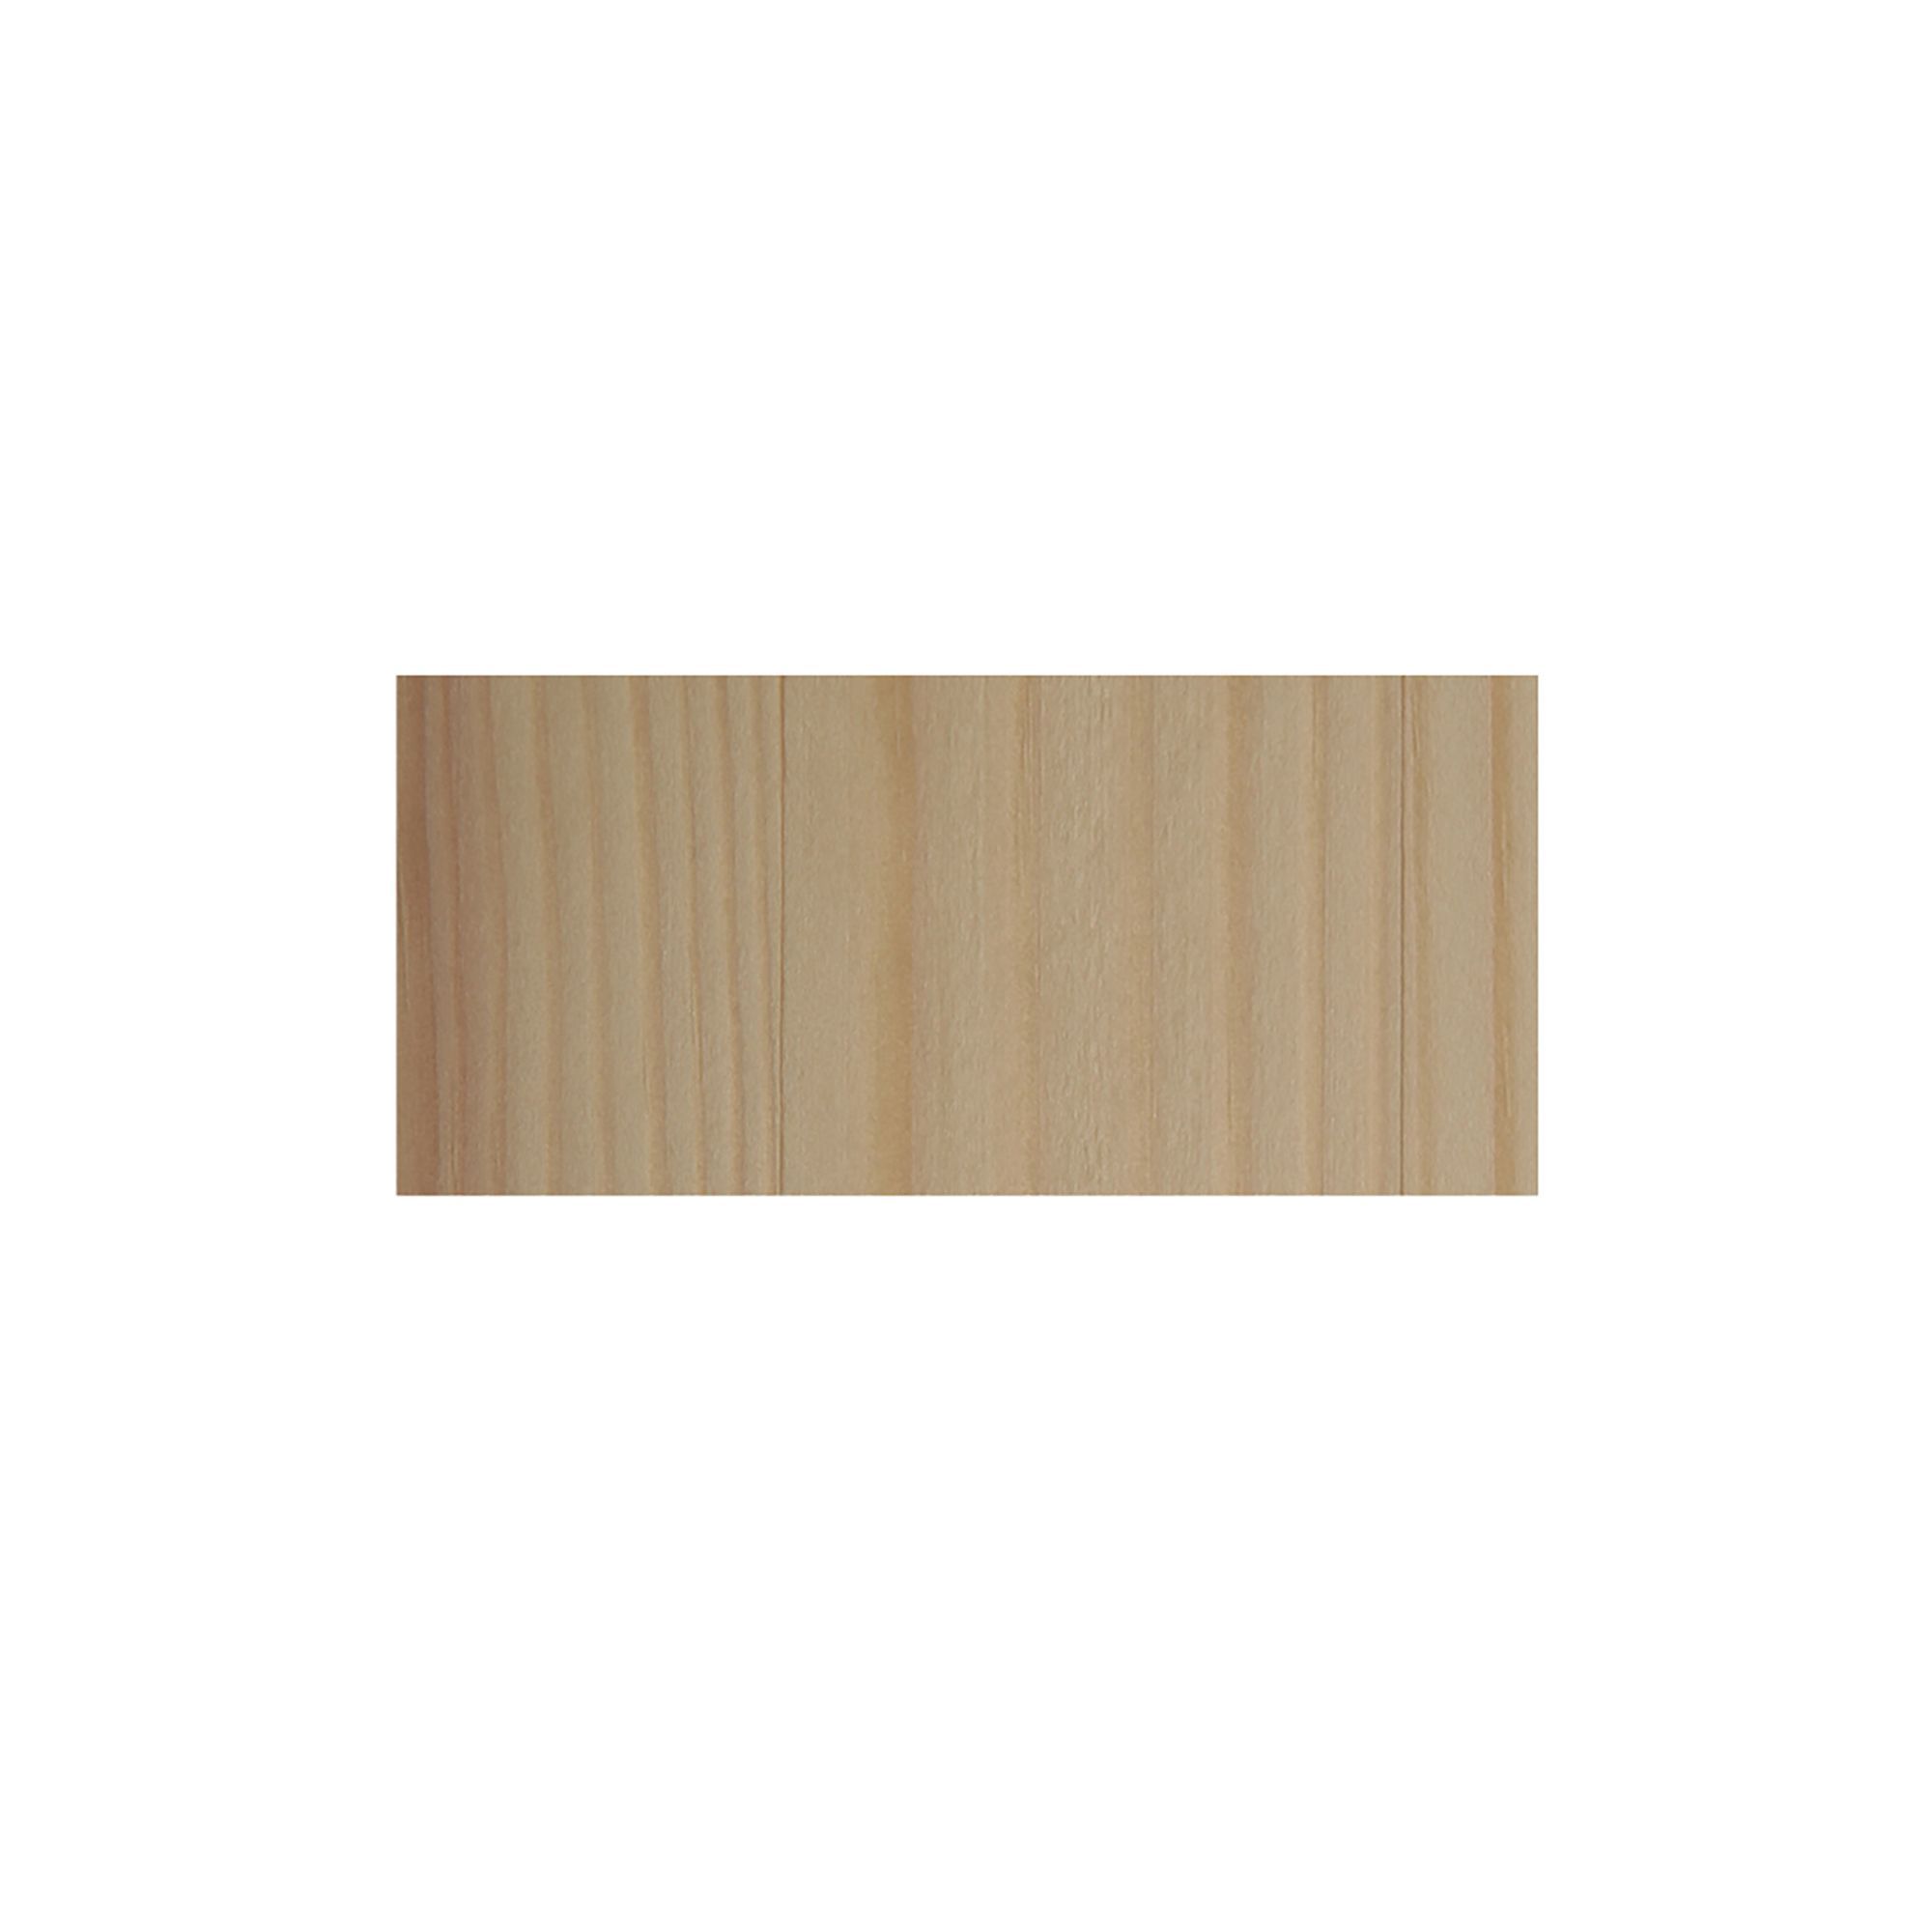 Cheshire Mouldings Smooth Planed Square edge Pine Stripwood (L)0.9m (W)46mm (T)21mm STPN59